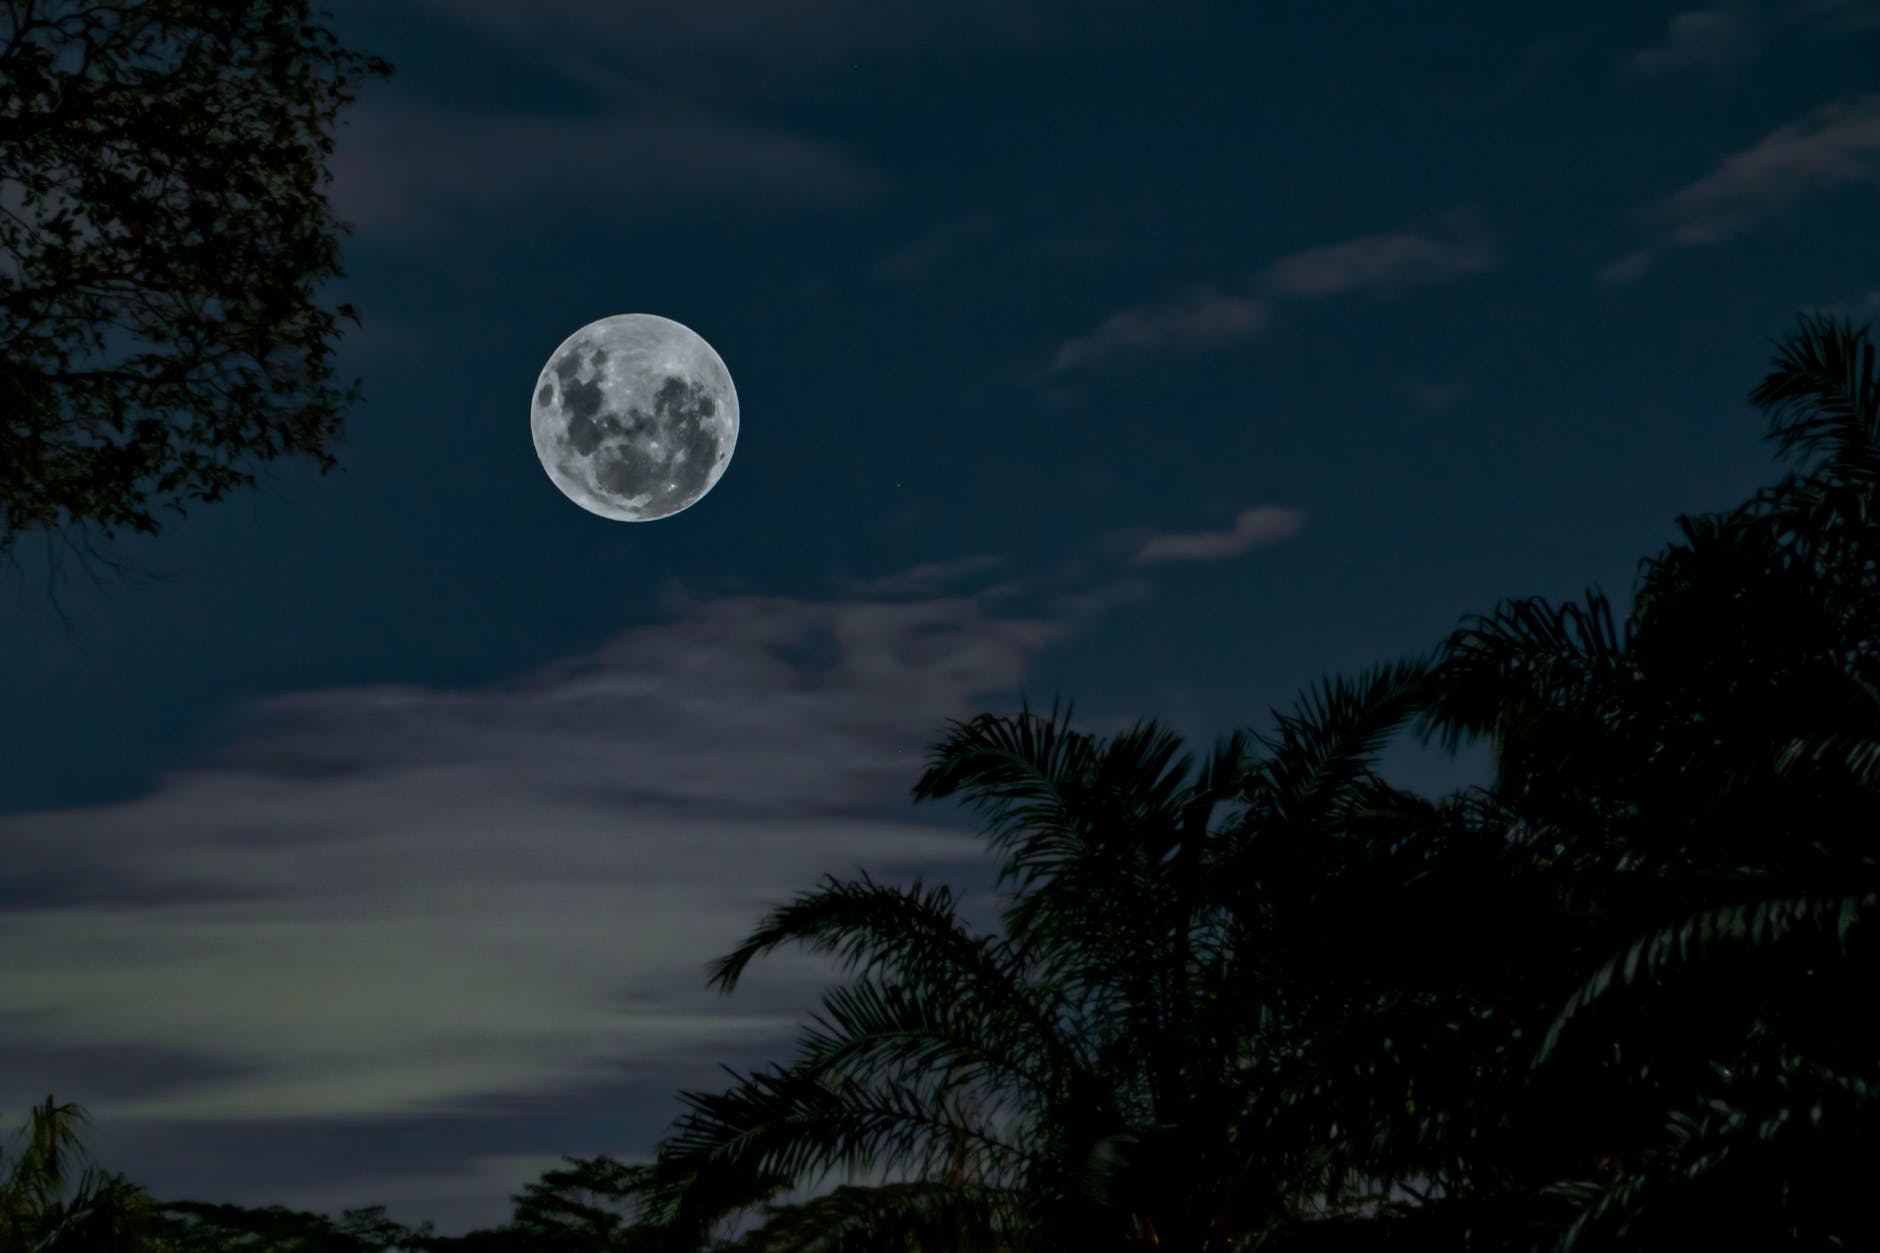  Here Are 5 Ways a Full Moon Can Affect Your Mood